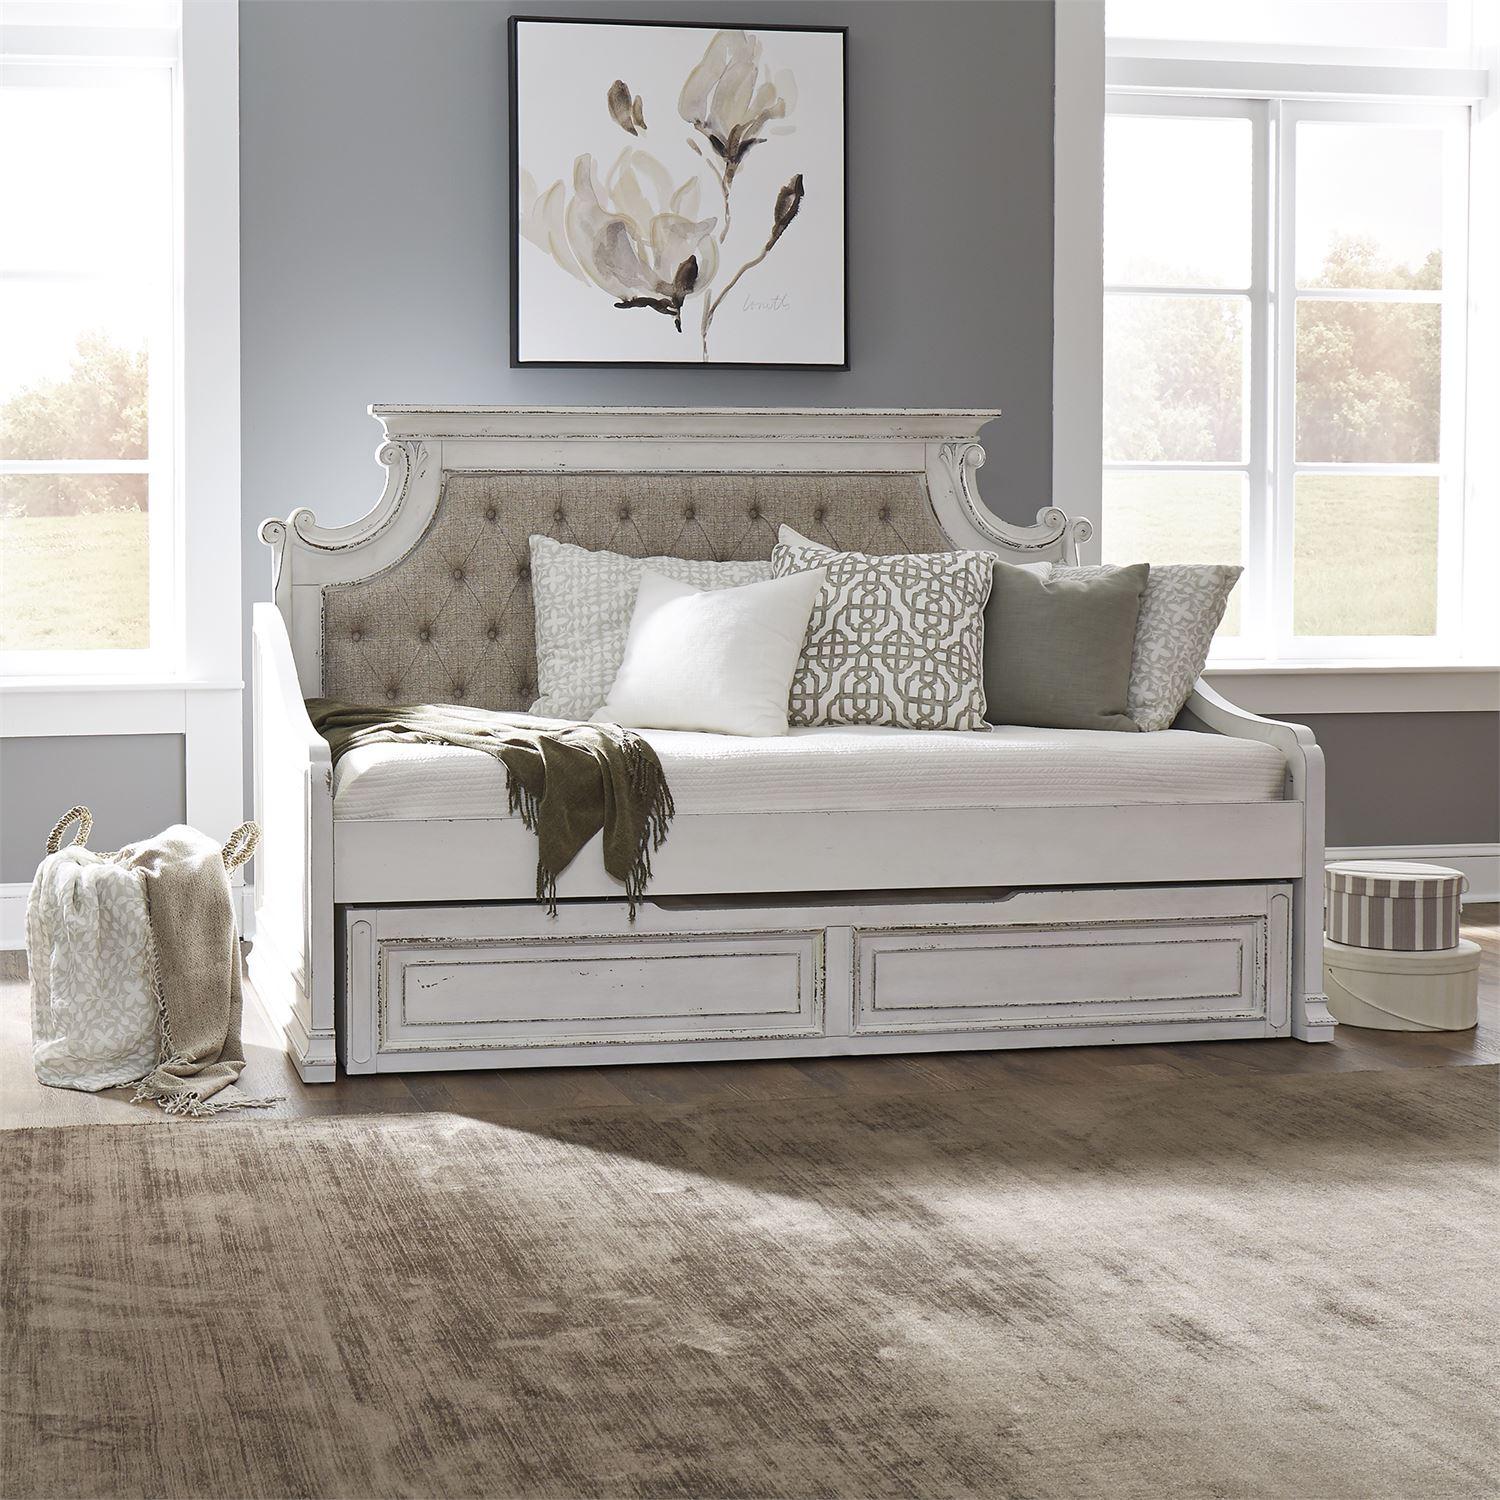   Magnolia Manor  (244-DAY) Daybed  